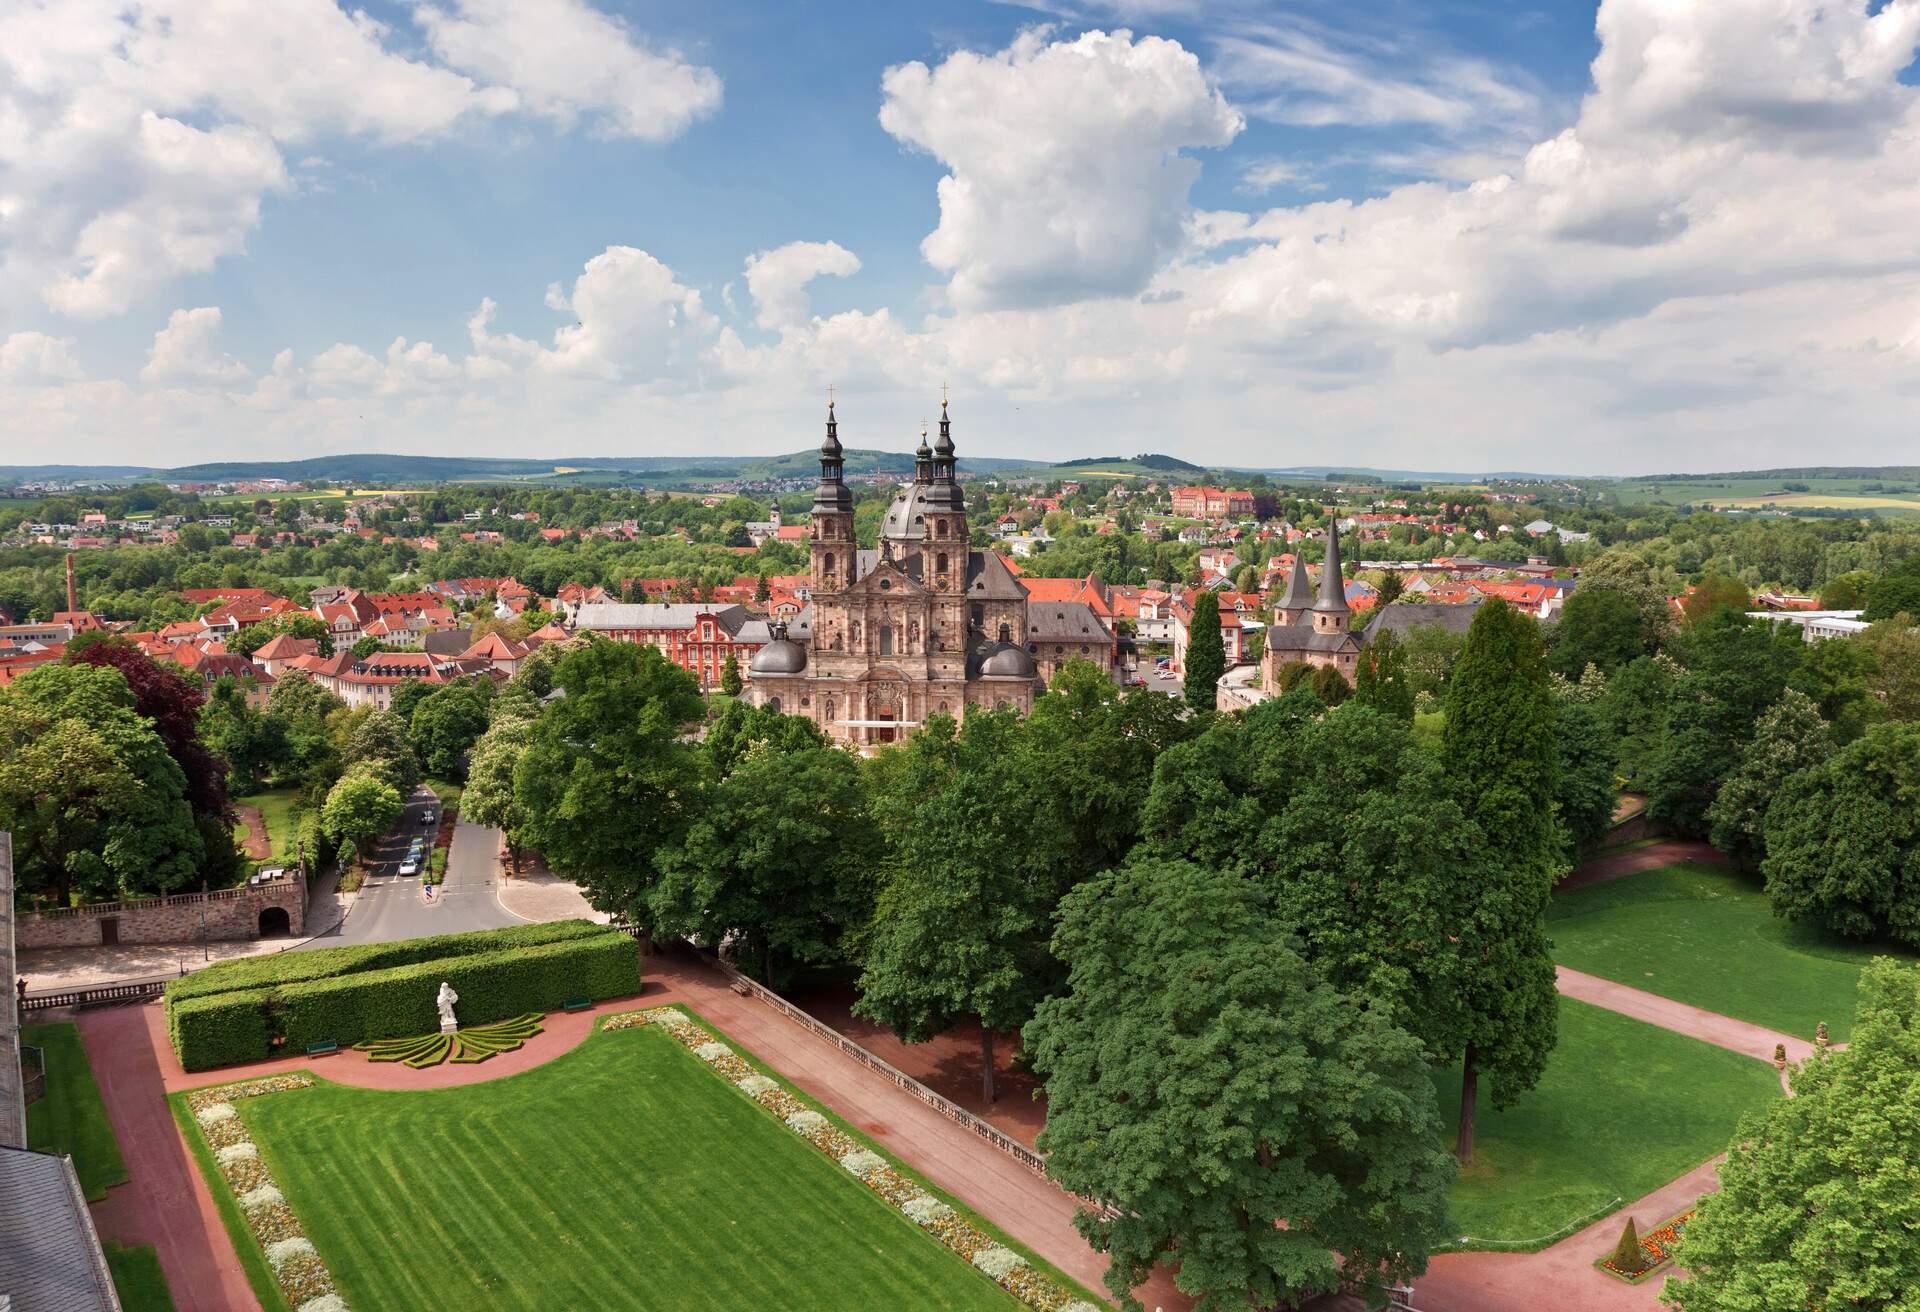 overlooking the cathedral and urban landscape of Fulda from the viewing platform of the city hall